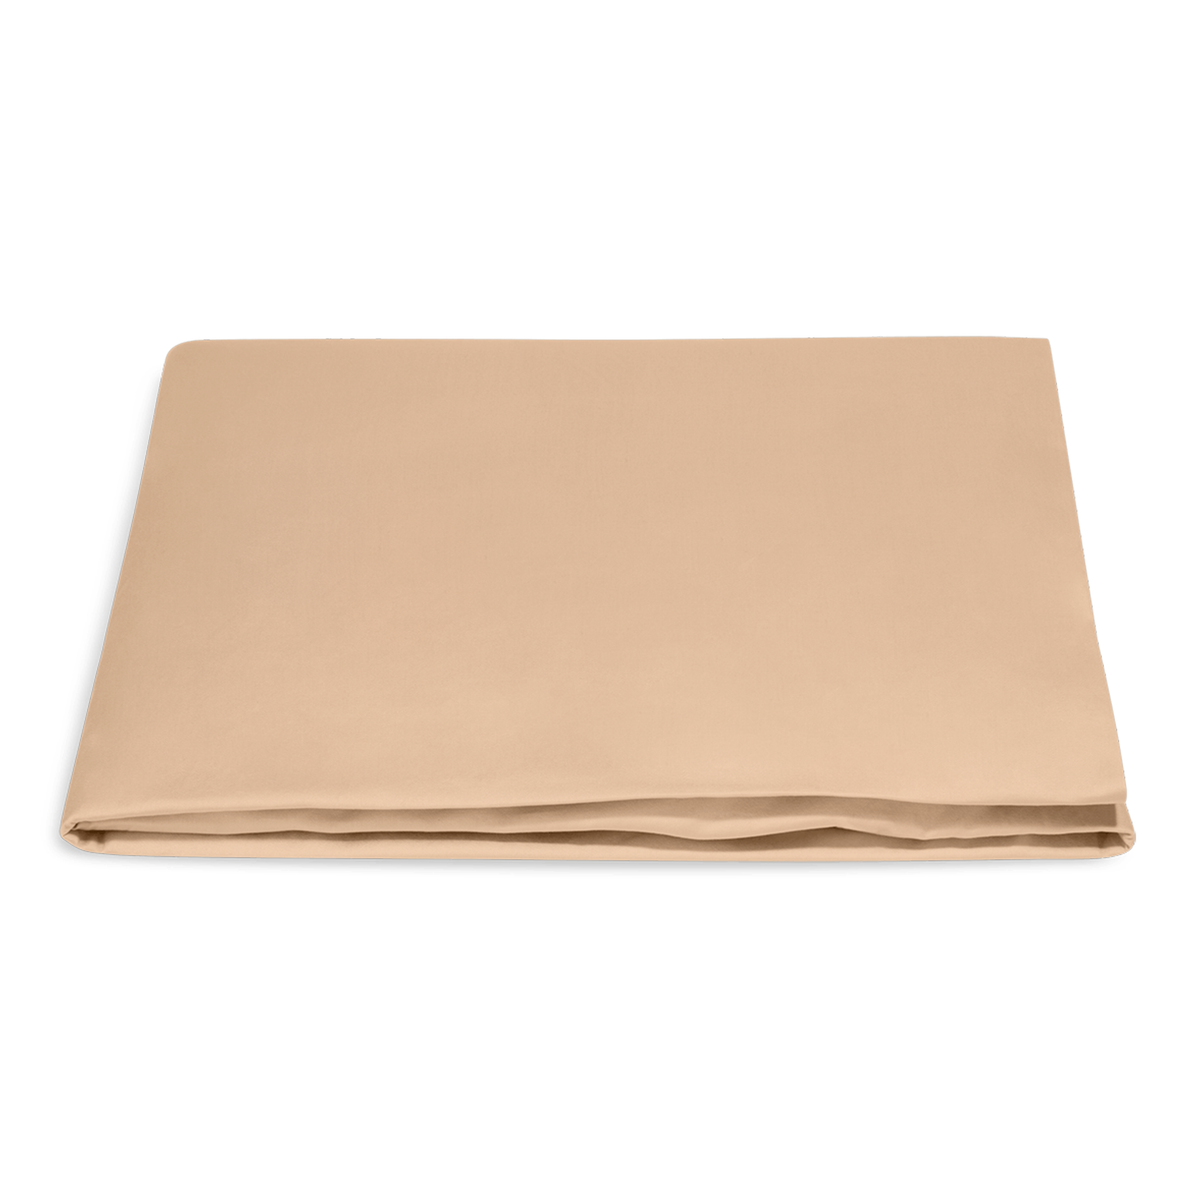 Folded Fitted Sheet of Matouk Nocturne Bedding Collection in Color Ambrosia